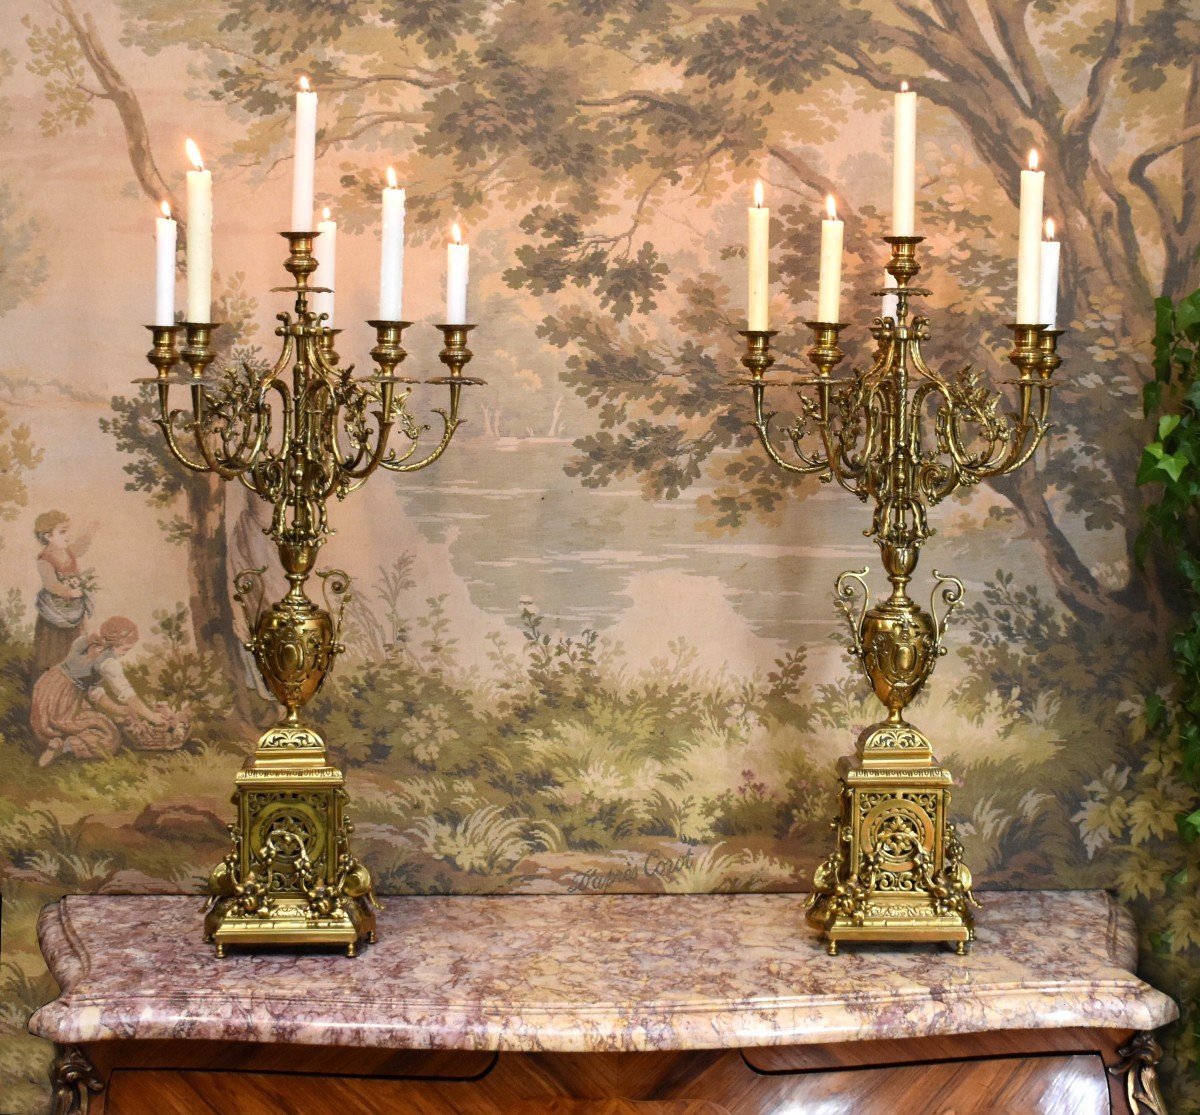 Spectacular Pair Of Candelabras In Neo-gothic Style In Bronze With Six Arms Of Light.-photo-2